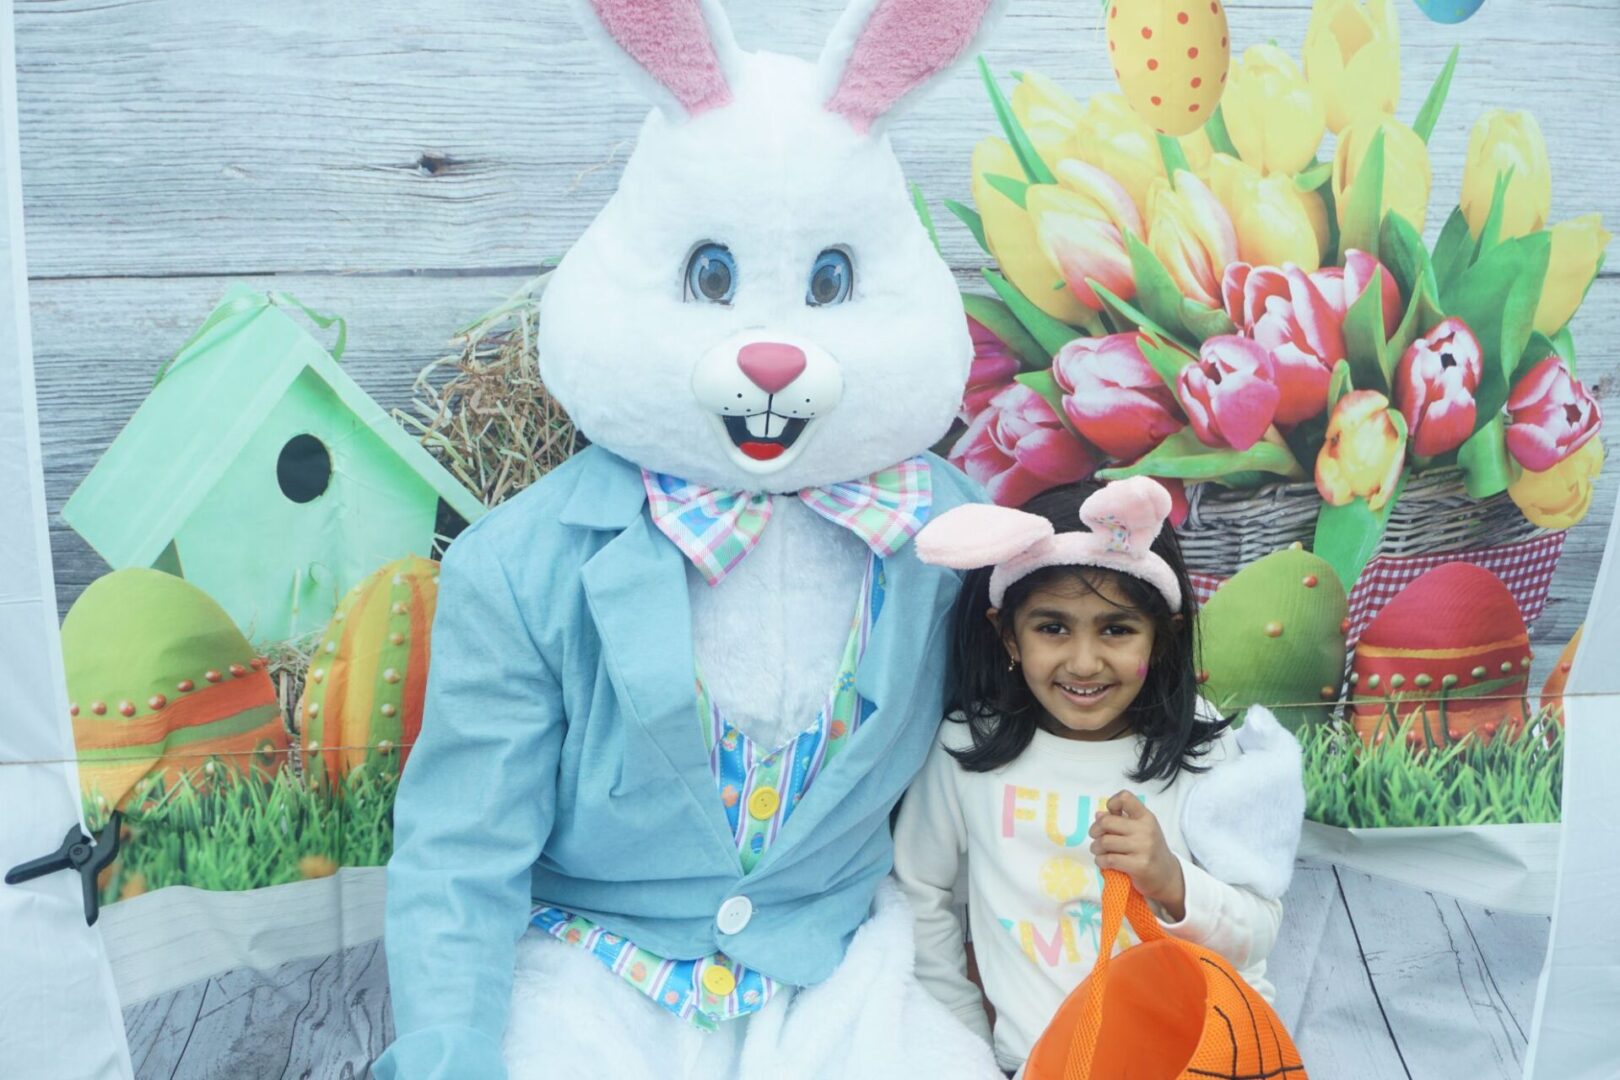 The bunny mascot together with a girl with pink bunny ears and orange basket bag